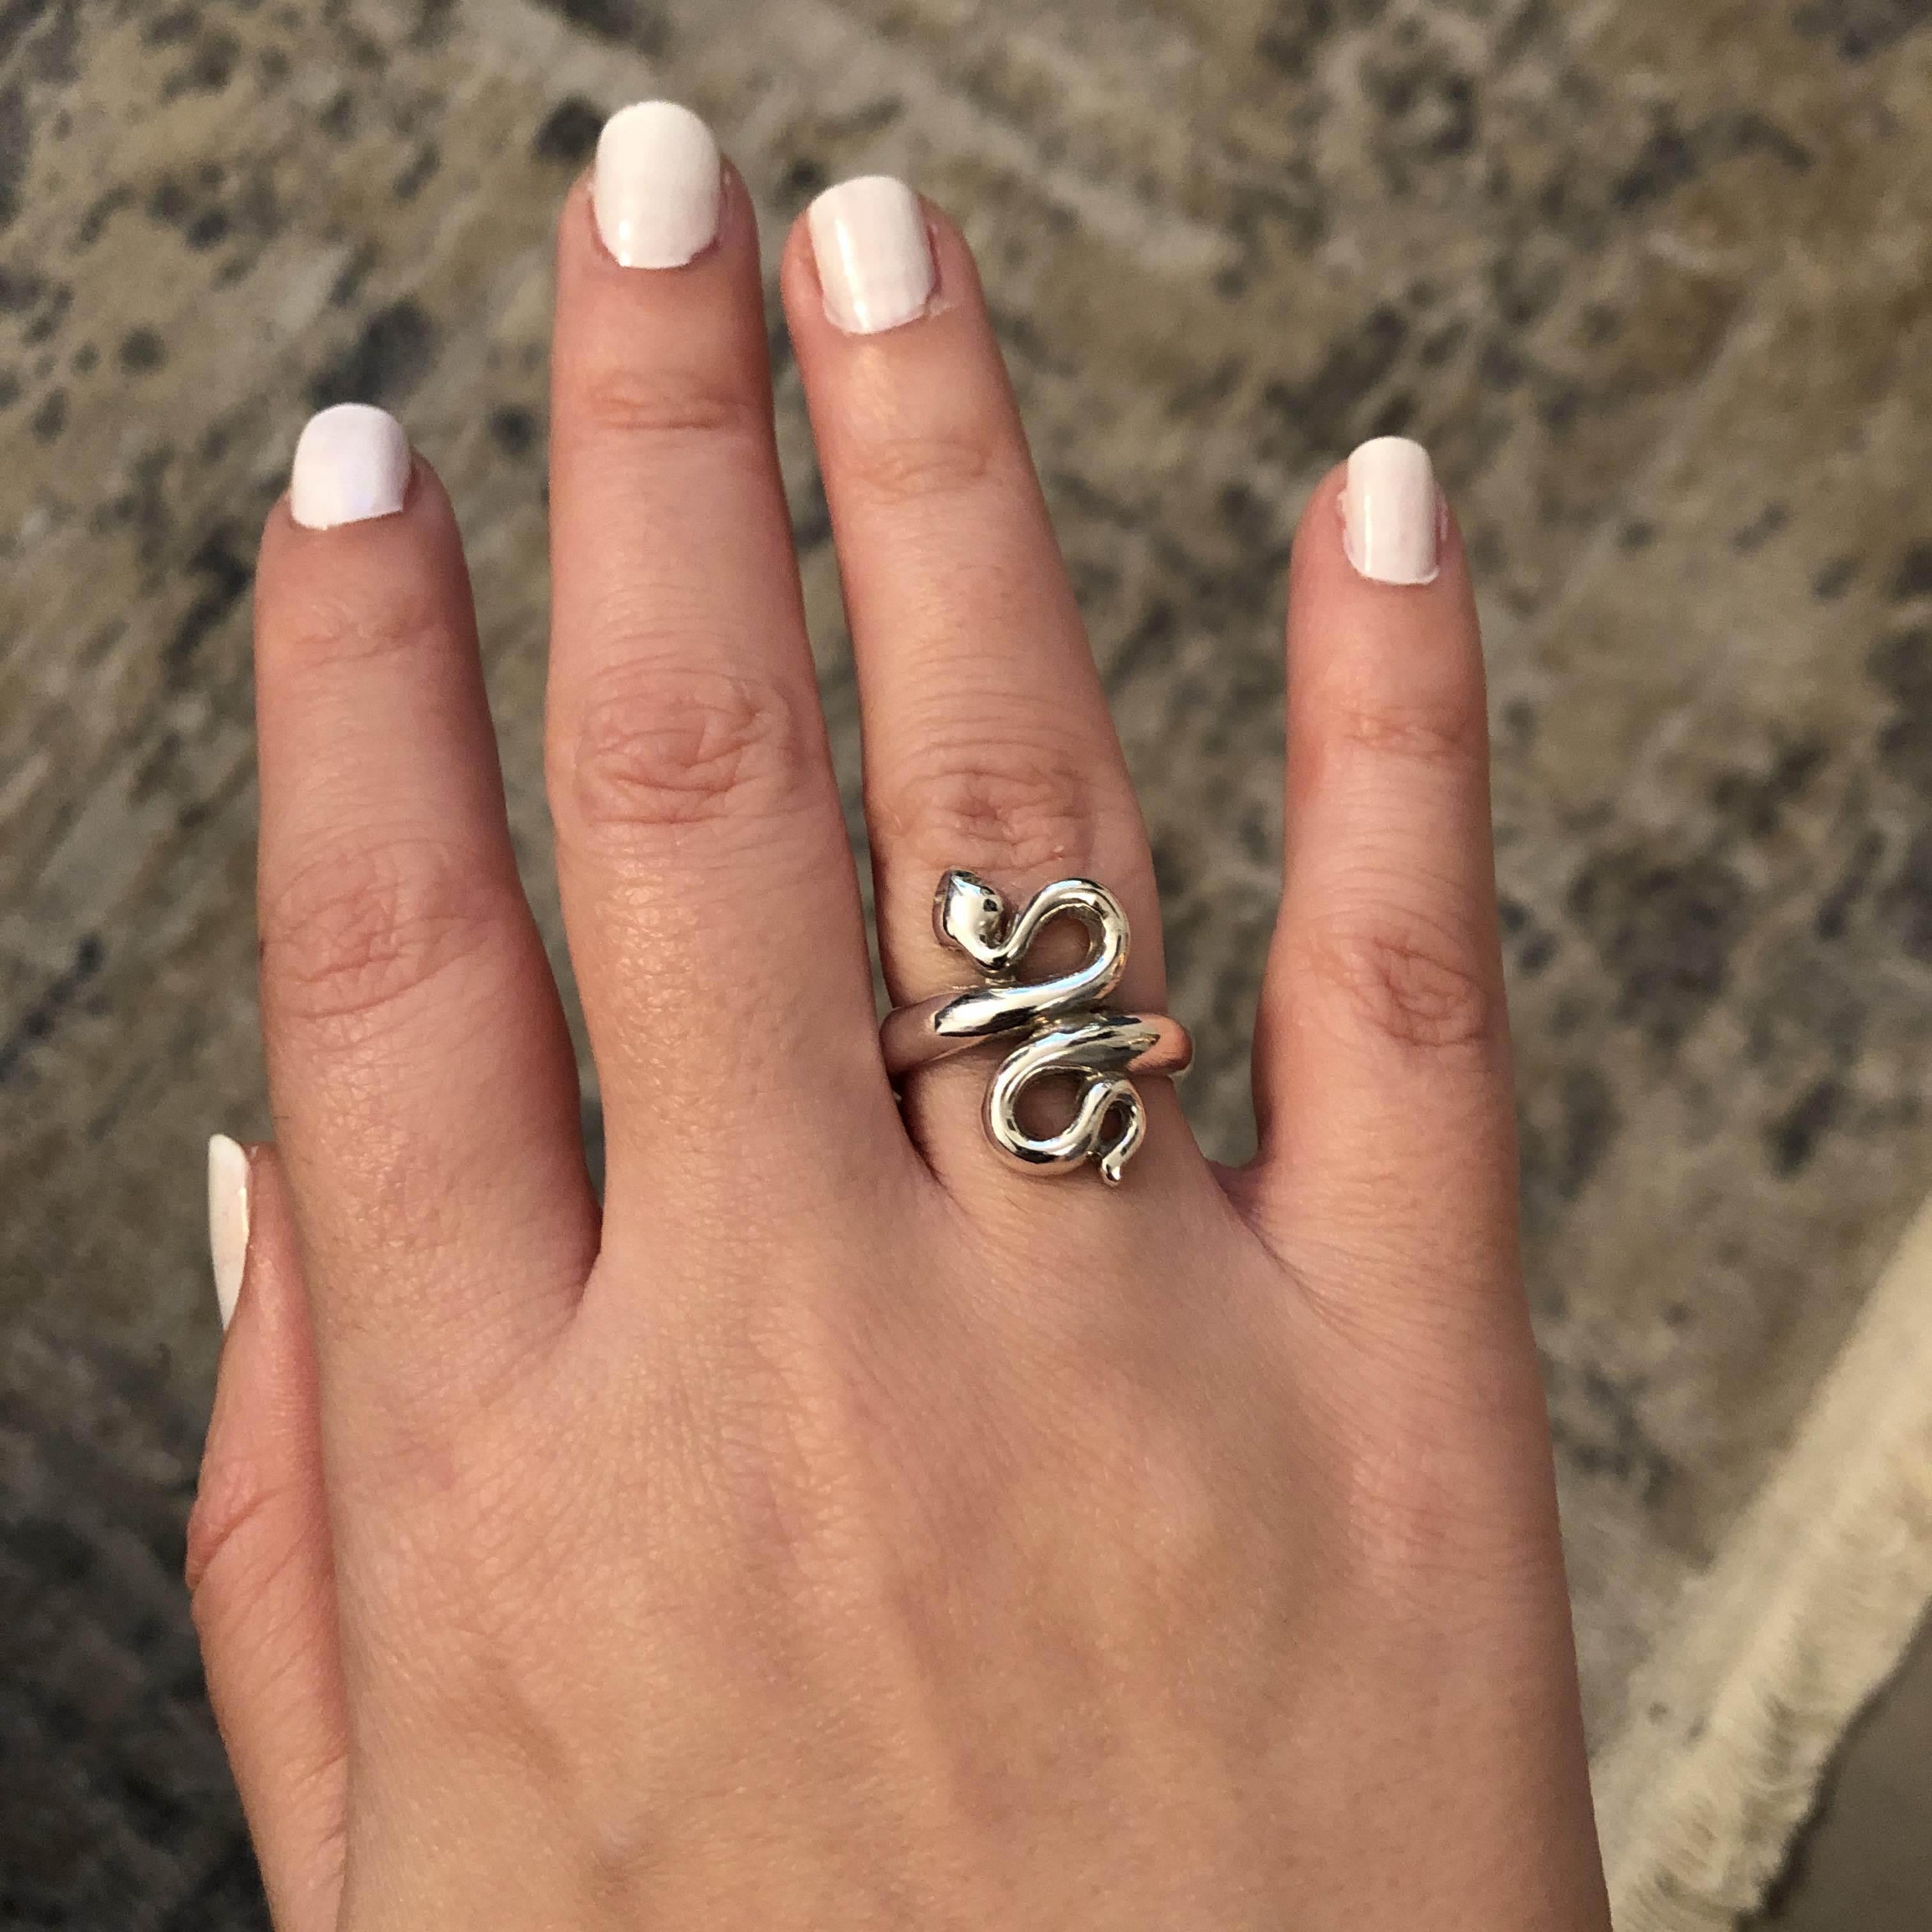 Coiled Snake Ring, Ancient Greek Minoan Ring, Sterling Silver Ring, Handmade Ring, Animal Jewelry, Greek Jewelry